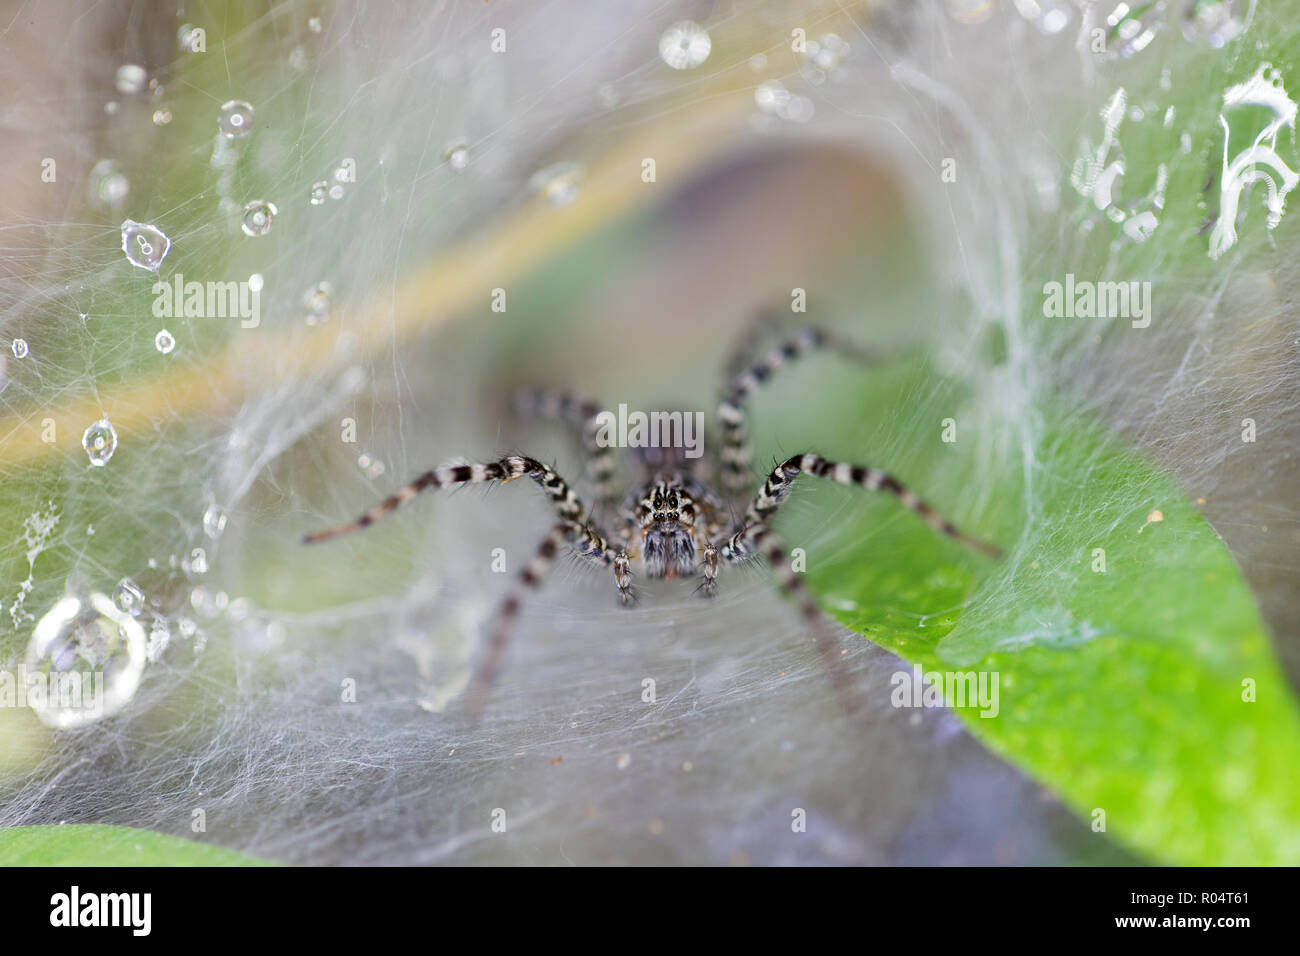 Close up on a striped spider waiting on wet web Stock Photo